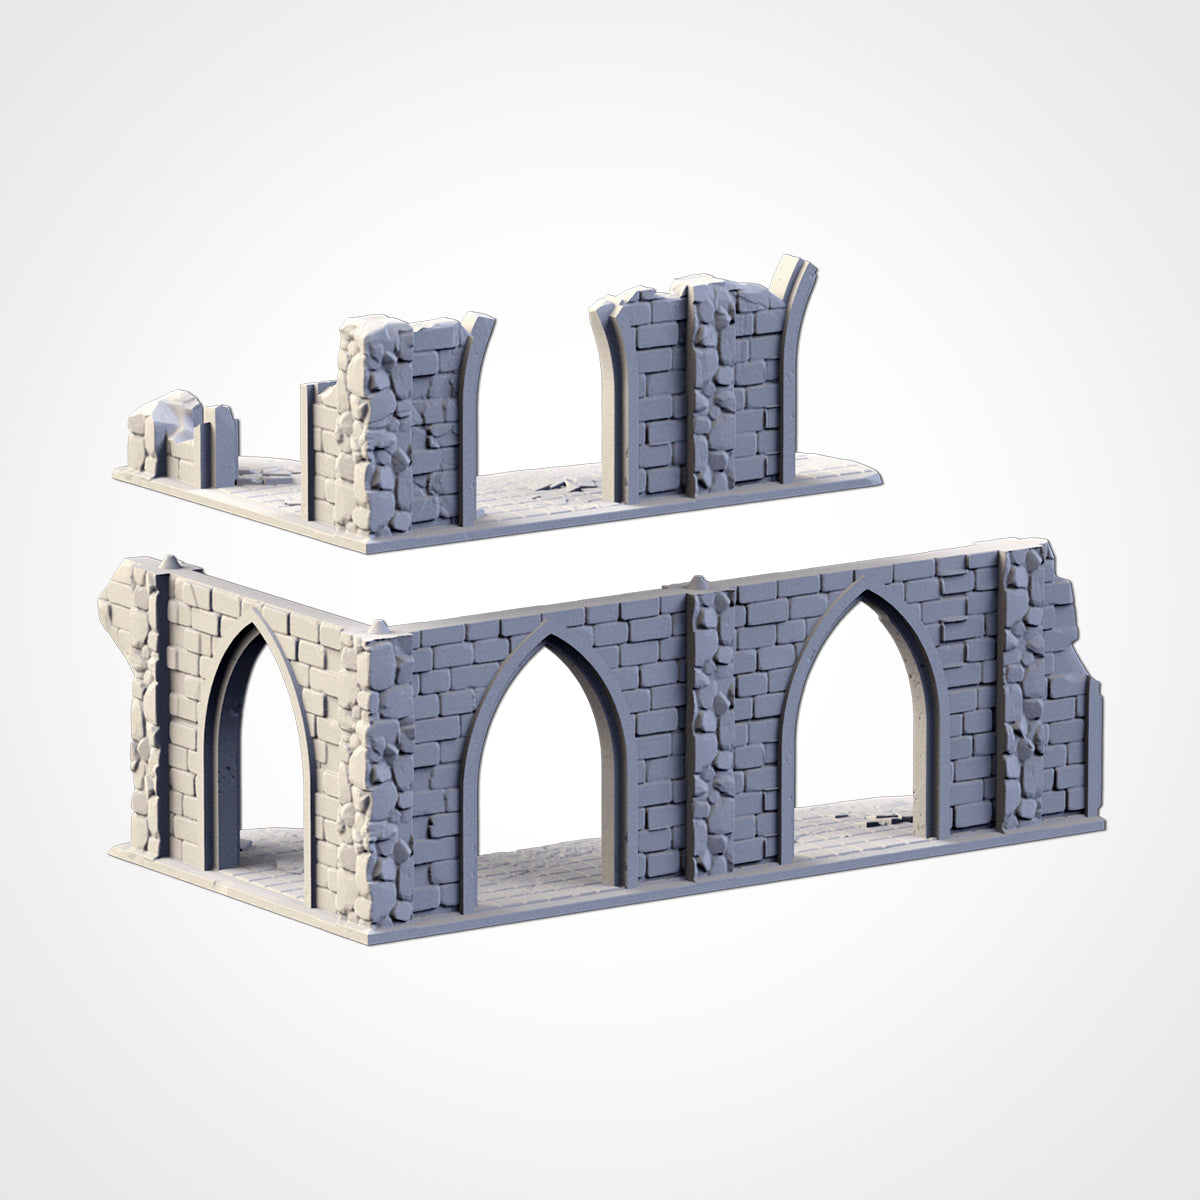 WTC Compatible Ruins - Various Styles | Scatter Terrain | Txarli Factory   | Table Top Gaming